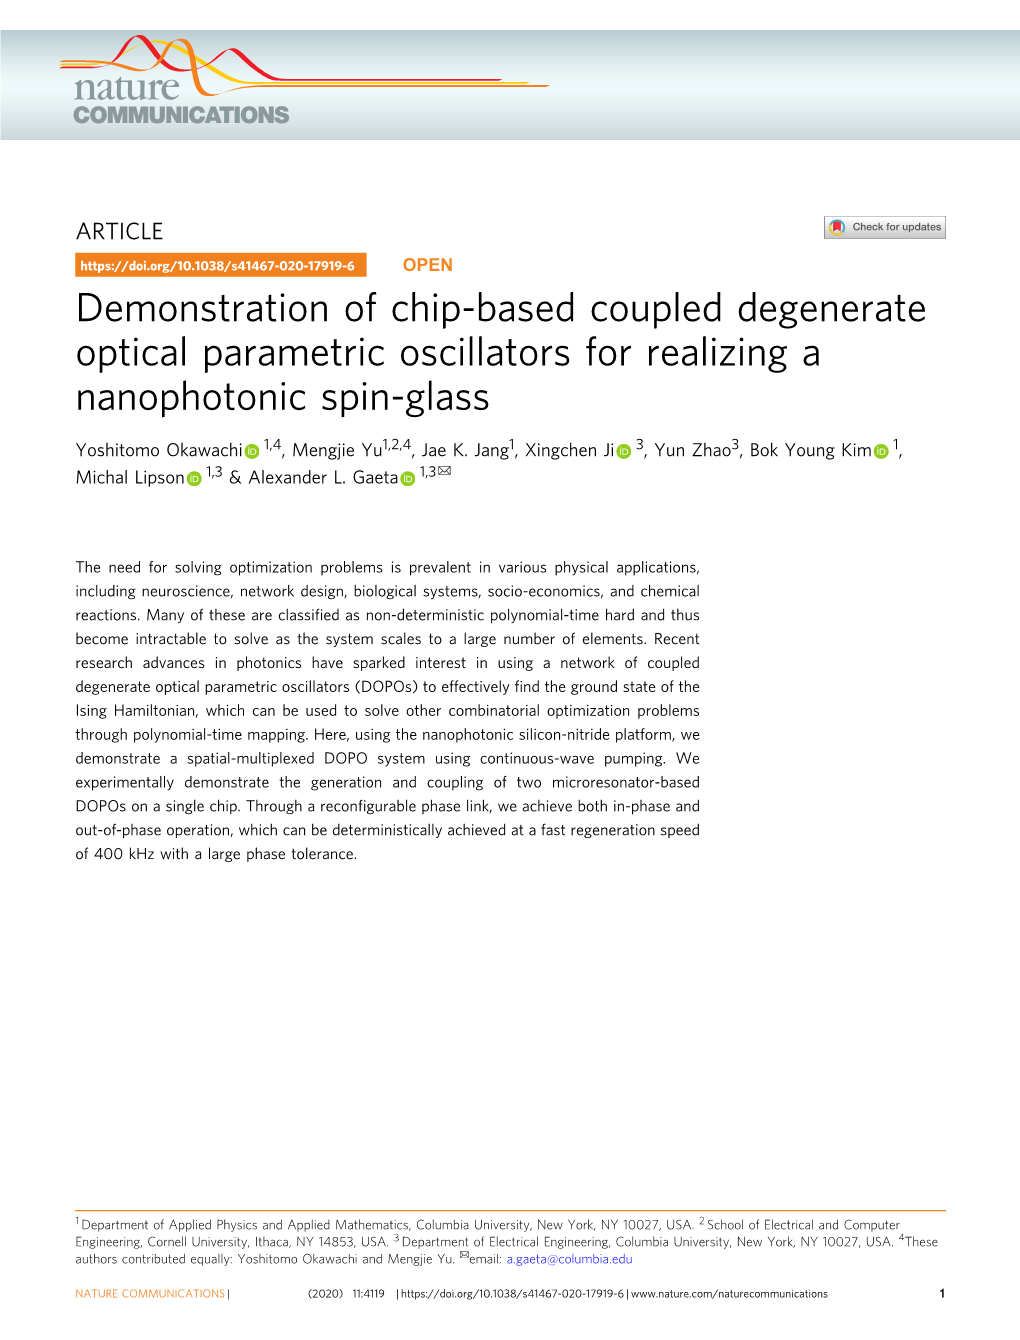 Demonstration of Chip-Based Coupled Degenerate Optical Parametric Oscillators for Realizing a Nanophotonic Spin-Glass